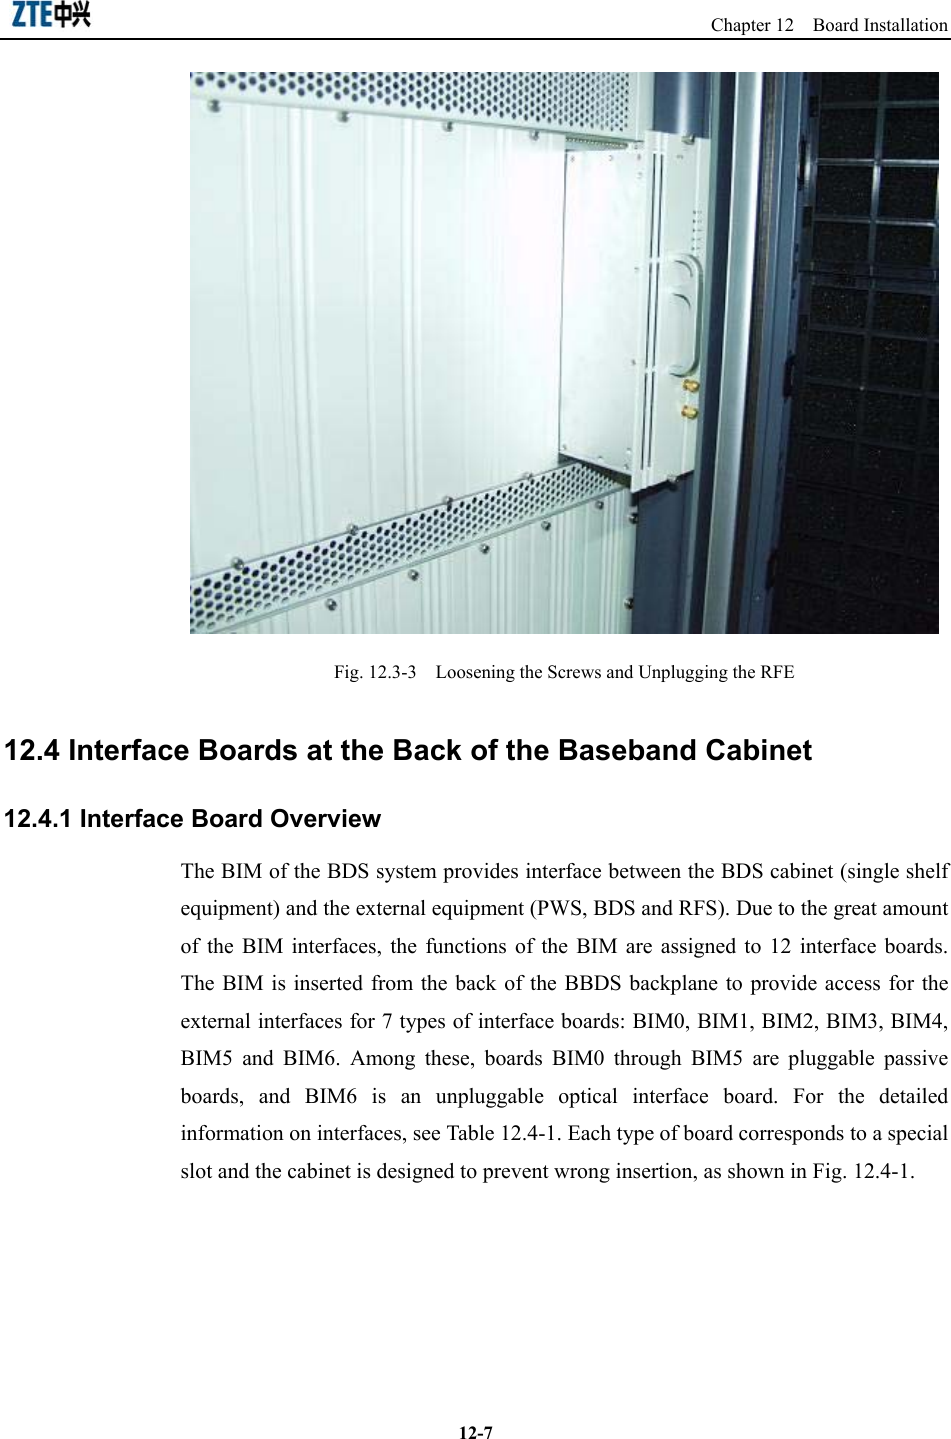                                                                   Chapter 12  Board Installation  12-7 Fig. 12.3-3    Loosening the Screws and Unplugging the RFE   12.4 Interface Boards at the Back of the Baseband Cabinet 12.4.1 Interface Board Overview The BIM of the BDS system provides interface between the BDS cabinet (single shelf equipment) and the external equipment (PWS, BDS and RFS). Due to the great amount of the BIM interfaces, the functions of the BIM are assigned to 12 interface boards. The BIM is inserted from the back of the BBDS backplane to provide access for the external interfaces for 7 types of interface boards: BIM0, BIM1, BIM2, BIM3, BIM4, BIM5 and BIM6. Among these, boards BIM0 through BIM5 are pluggable passive boards, and BIM6 is an unpluggable optical interface board. For the detailed information on interfaces, see Table 12.4-1. Each type of board corresponds to a special slot and the cabinet is designed to prevent wrong insertion, as shown in Fig. 12.4-1.   